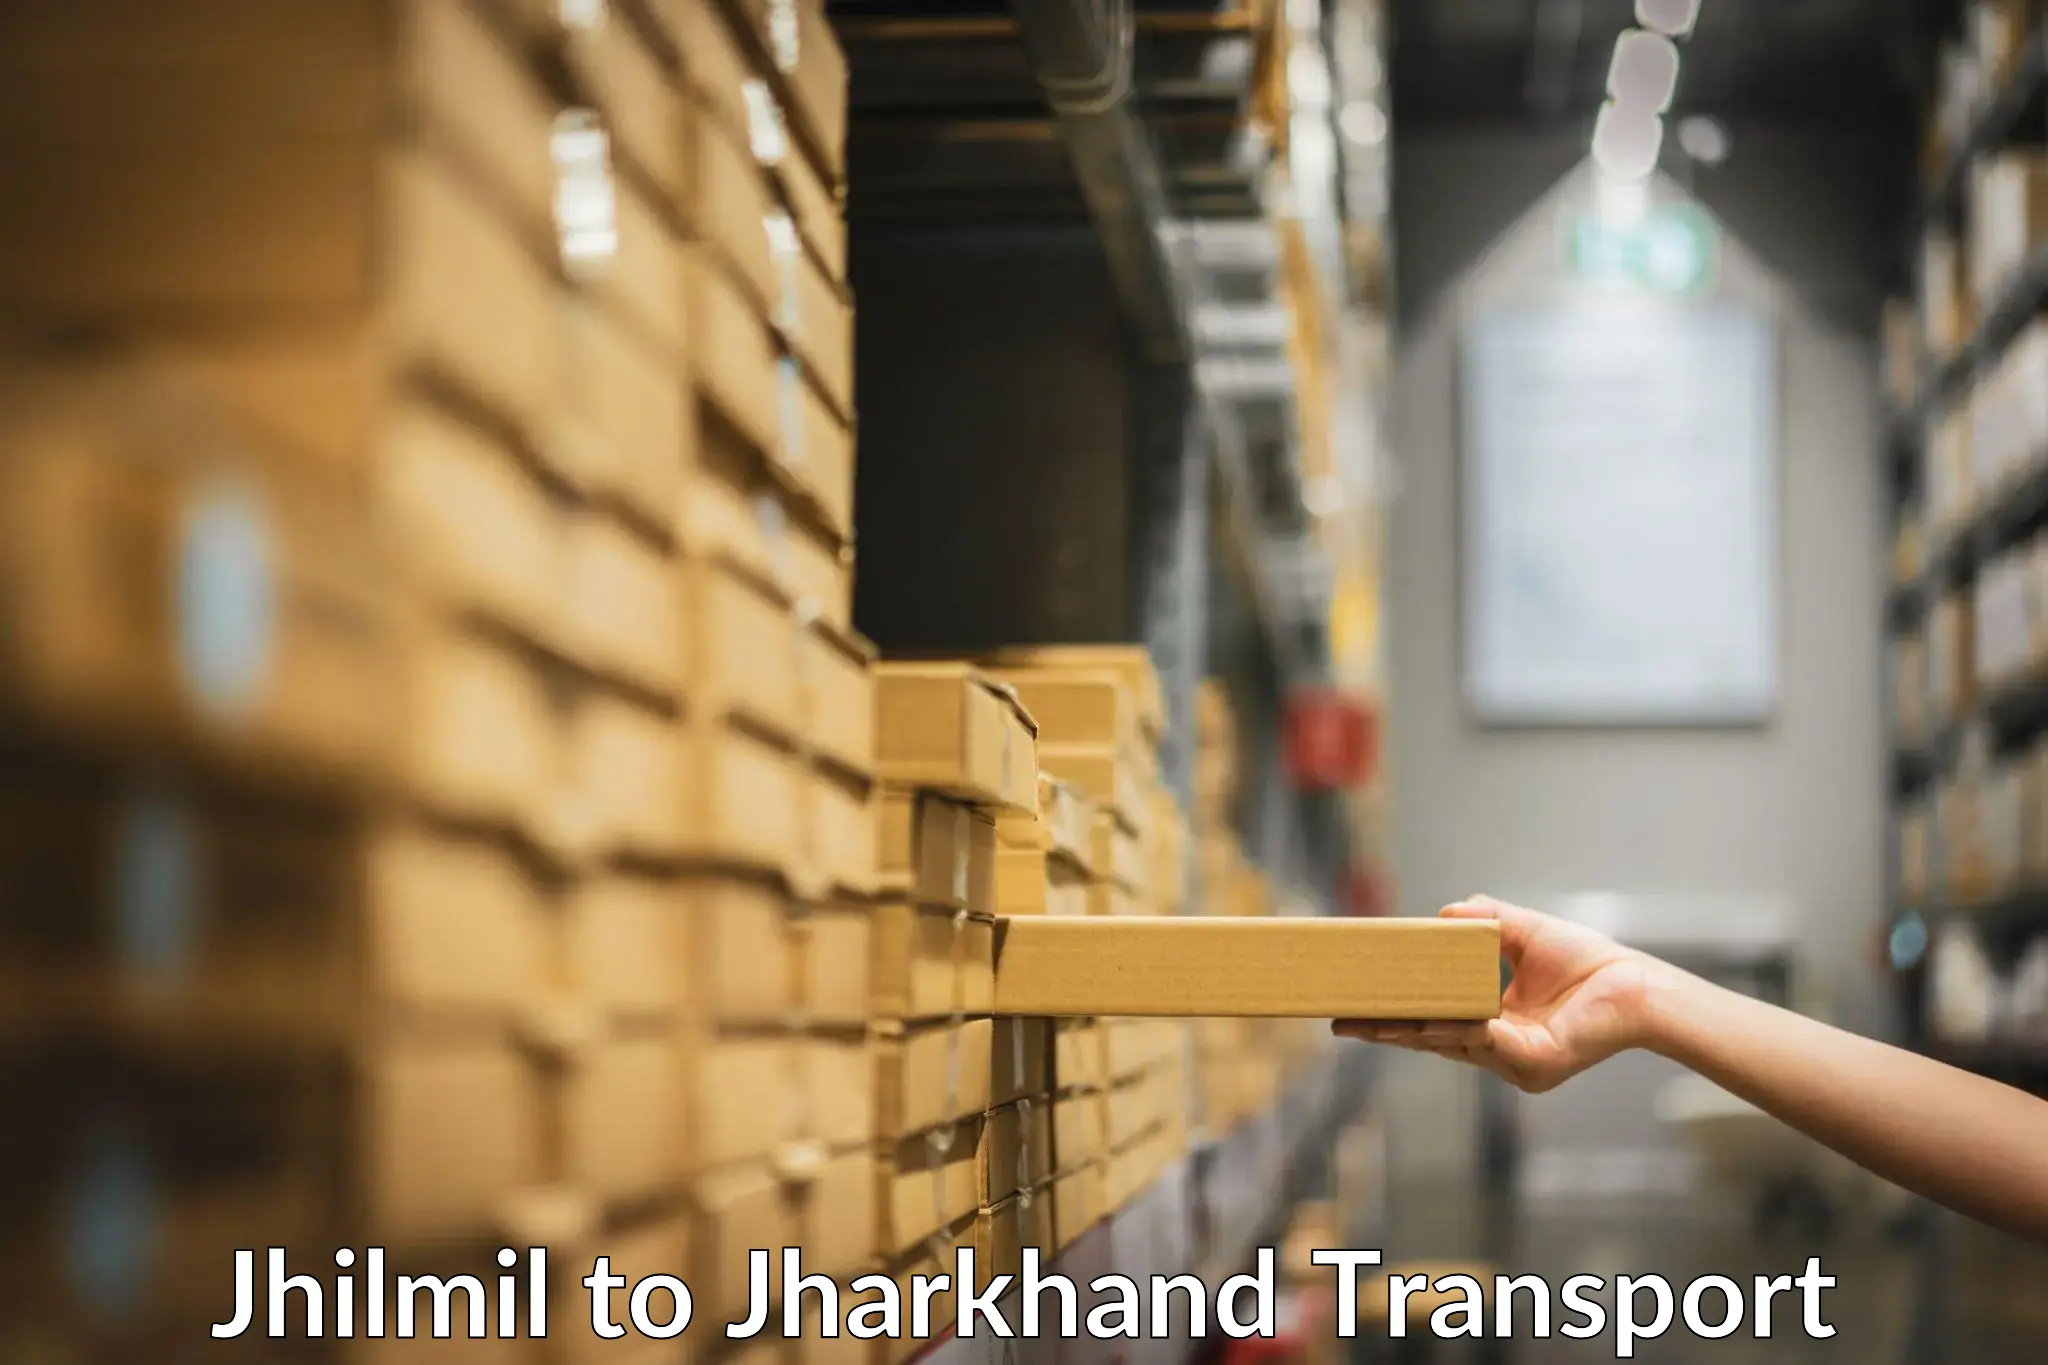 Commercial transport service Jhilmil to Chaibasa